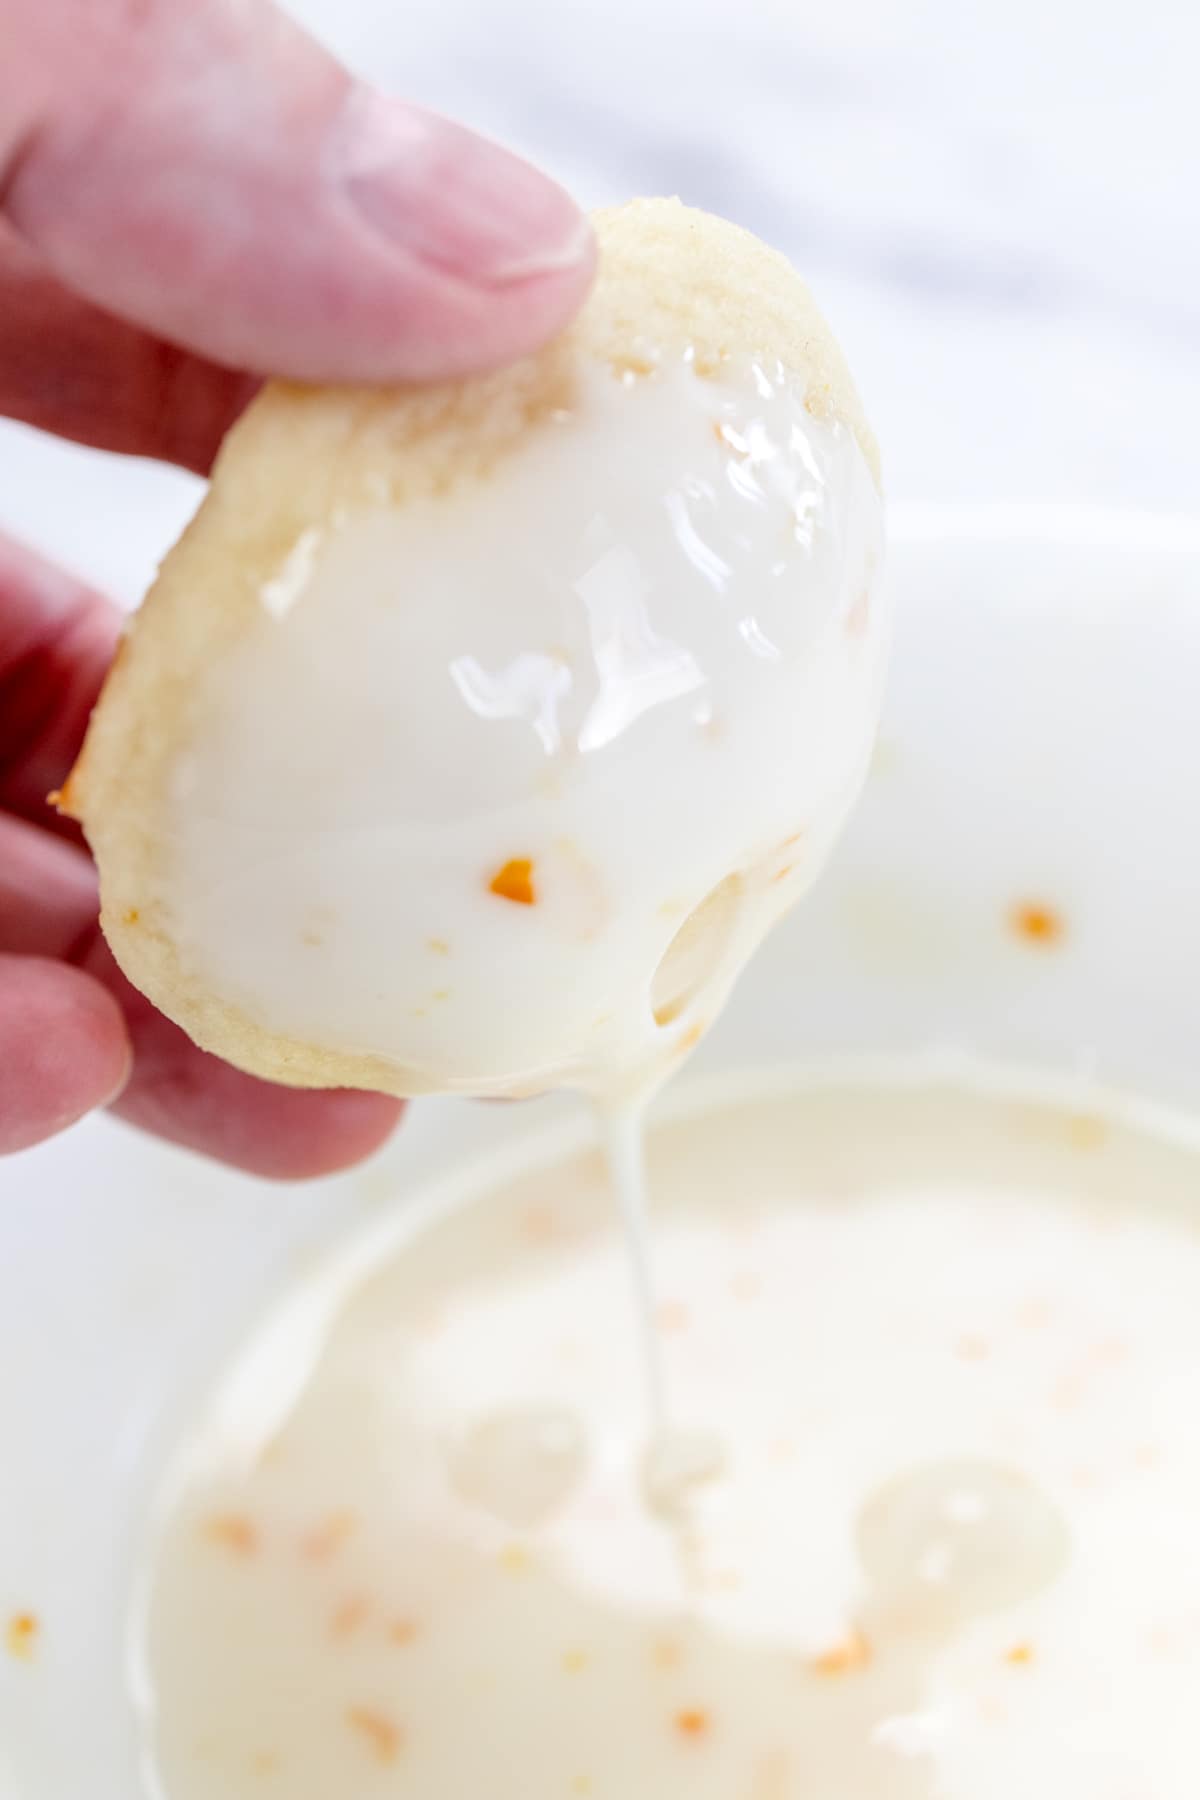 A Lemon ricotta cookie being held in mid air with frosting dripping off it.